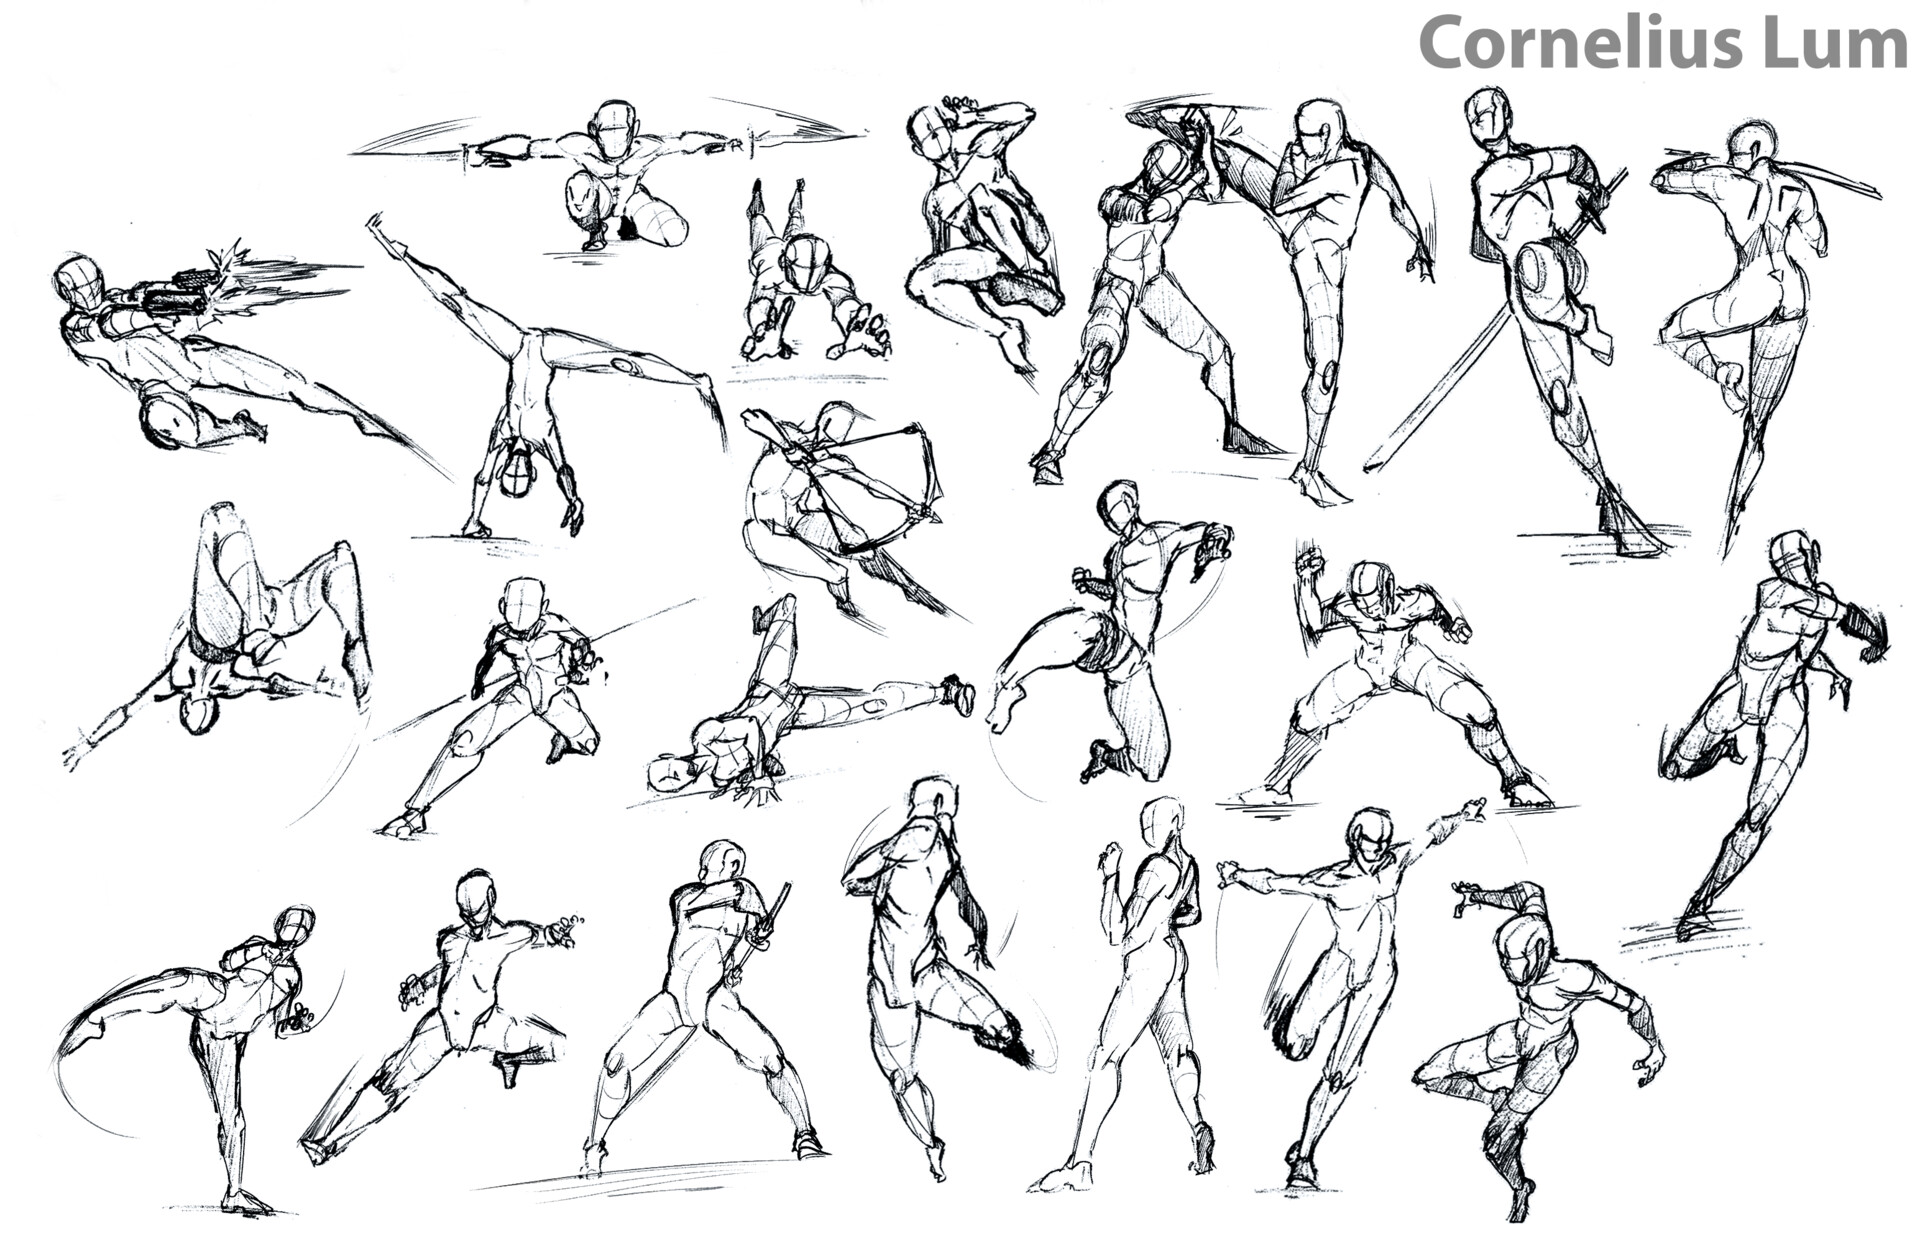 battle poses for drawing